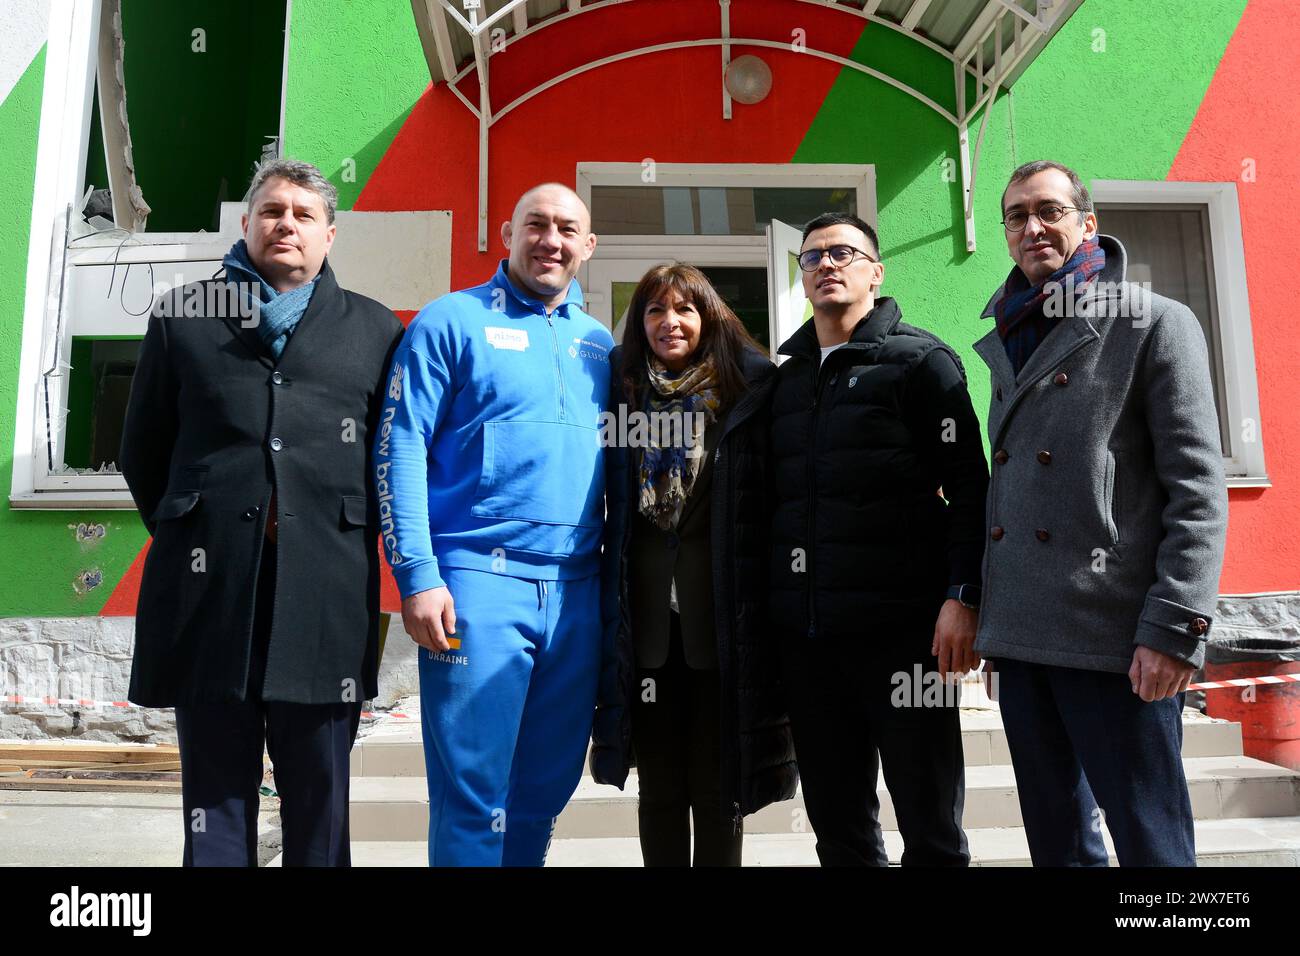 Mayor of Paris Anne Hidalgo (C) during a visit to the sports complex of FC Lokomotiv Kyiv, which was damaged by a Russian missile attack on January 23, 2024. The Mayor of Paris, Anne Hidalgo, visited Kyiv and visited FC Lokomotiv Kyiv, whose sports complex was damaged by a Russian missile attack on January 23, 2024. The mayor observed how the players of different age teams train on the field, and at the end took a joint photo with the football players. (Photo by Aleksandr Gusev / SOPA Images/Sipa USA) Stock Photo